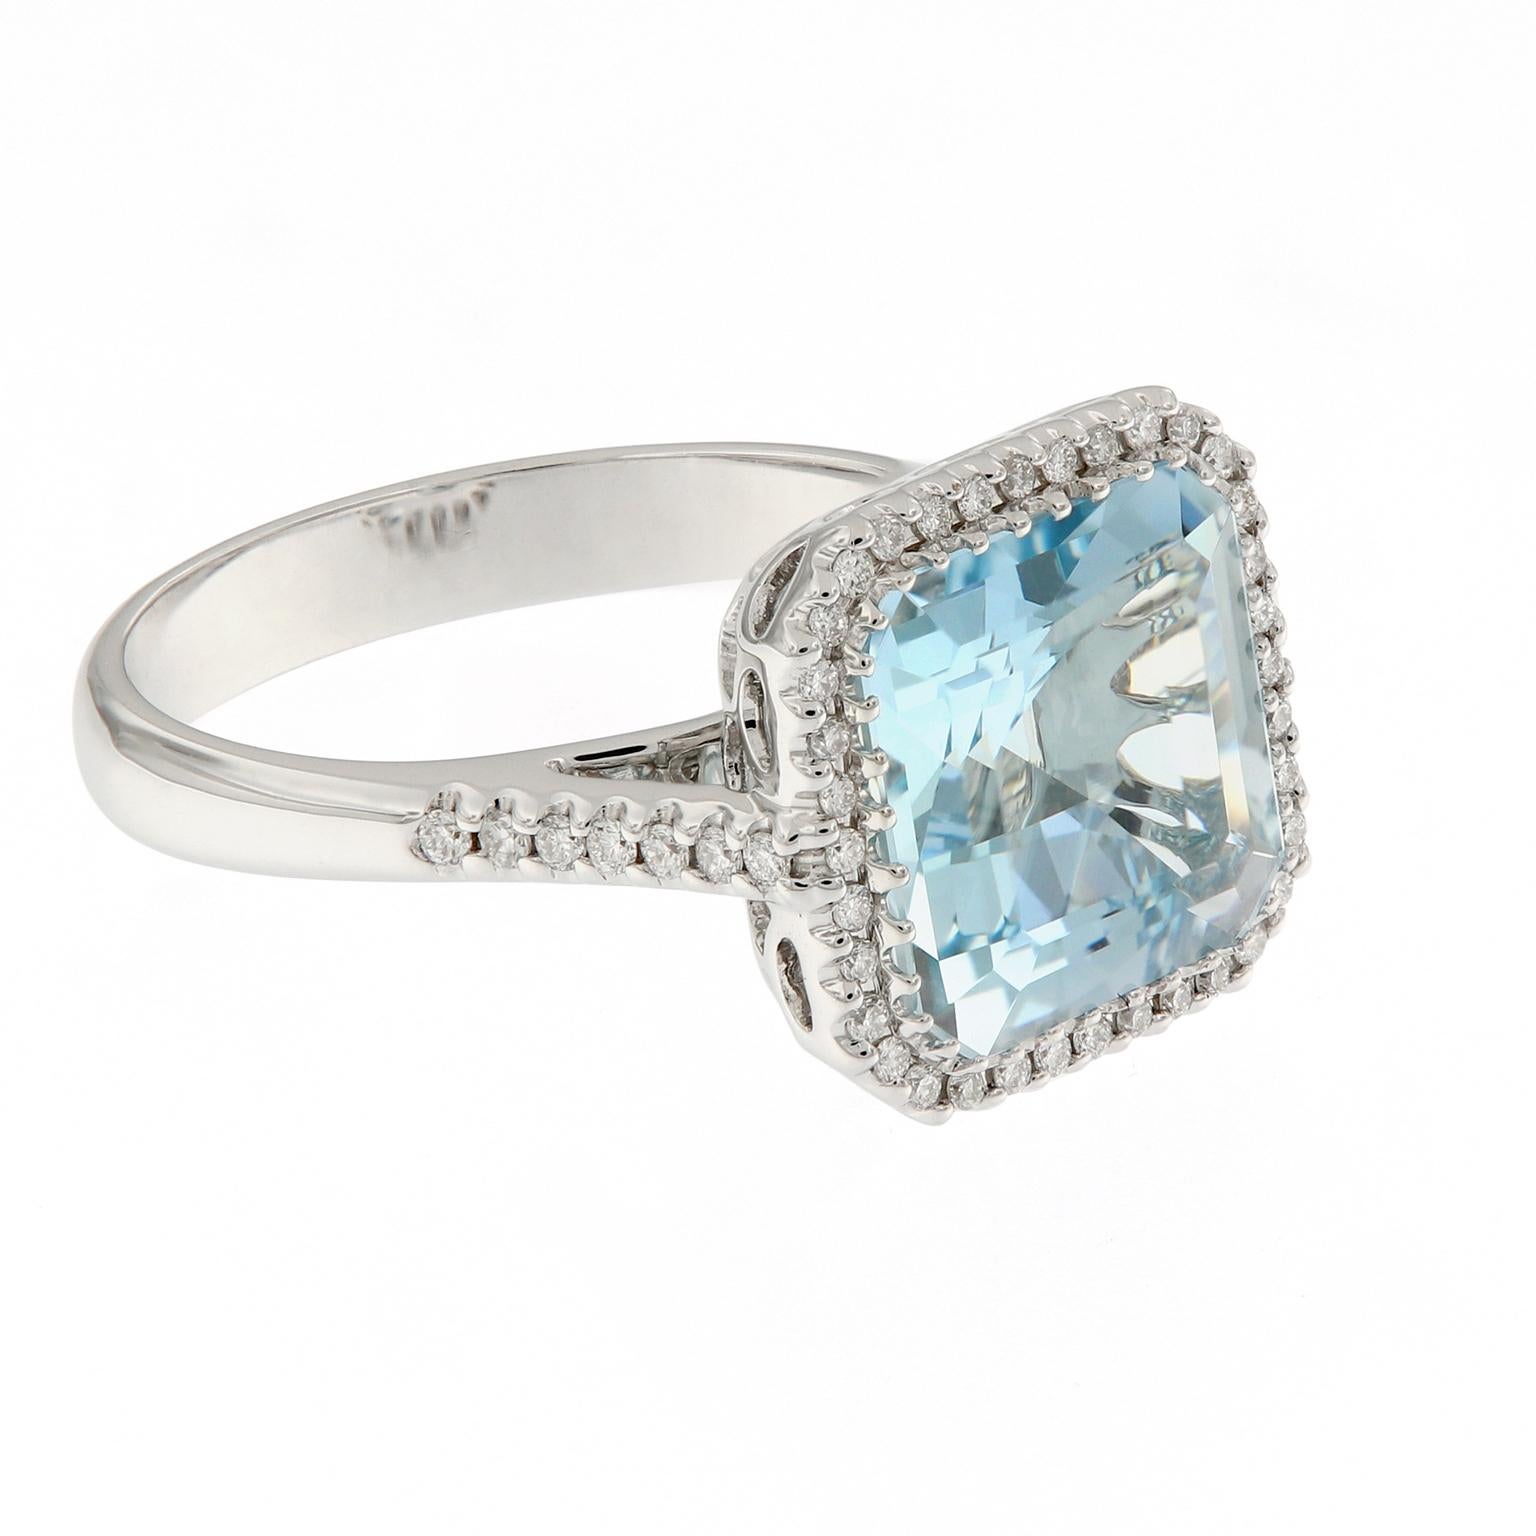 This gorgeous 18k white gold cocktail ring features a square step-cut aquamarine surrounded by a halo of pavé-set diamonds and beautifully balanced with diamonds running down the shank. The attention to detail on this ring is fantastic - the gallery